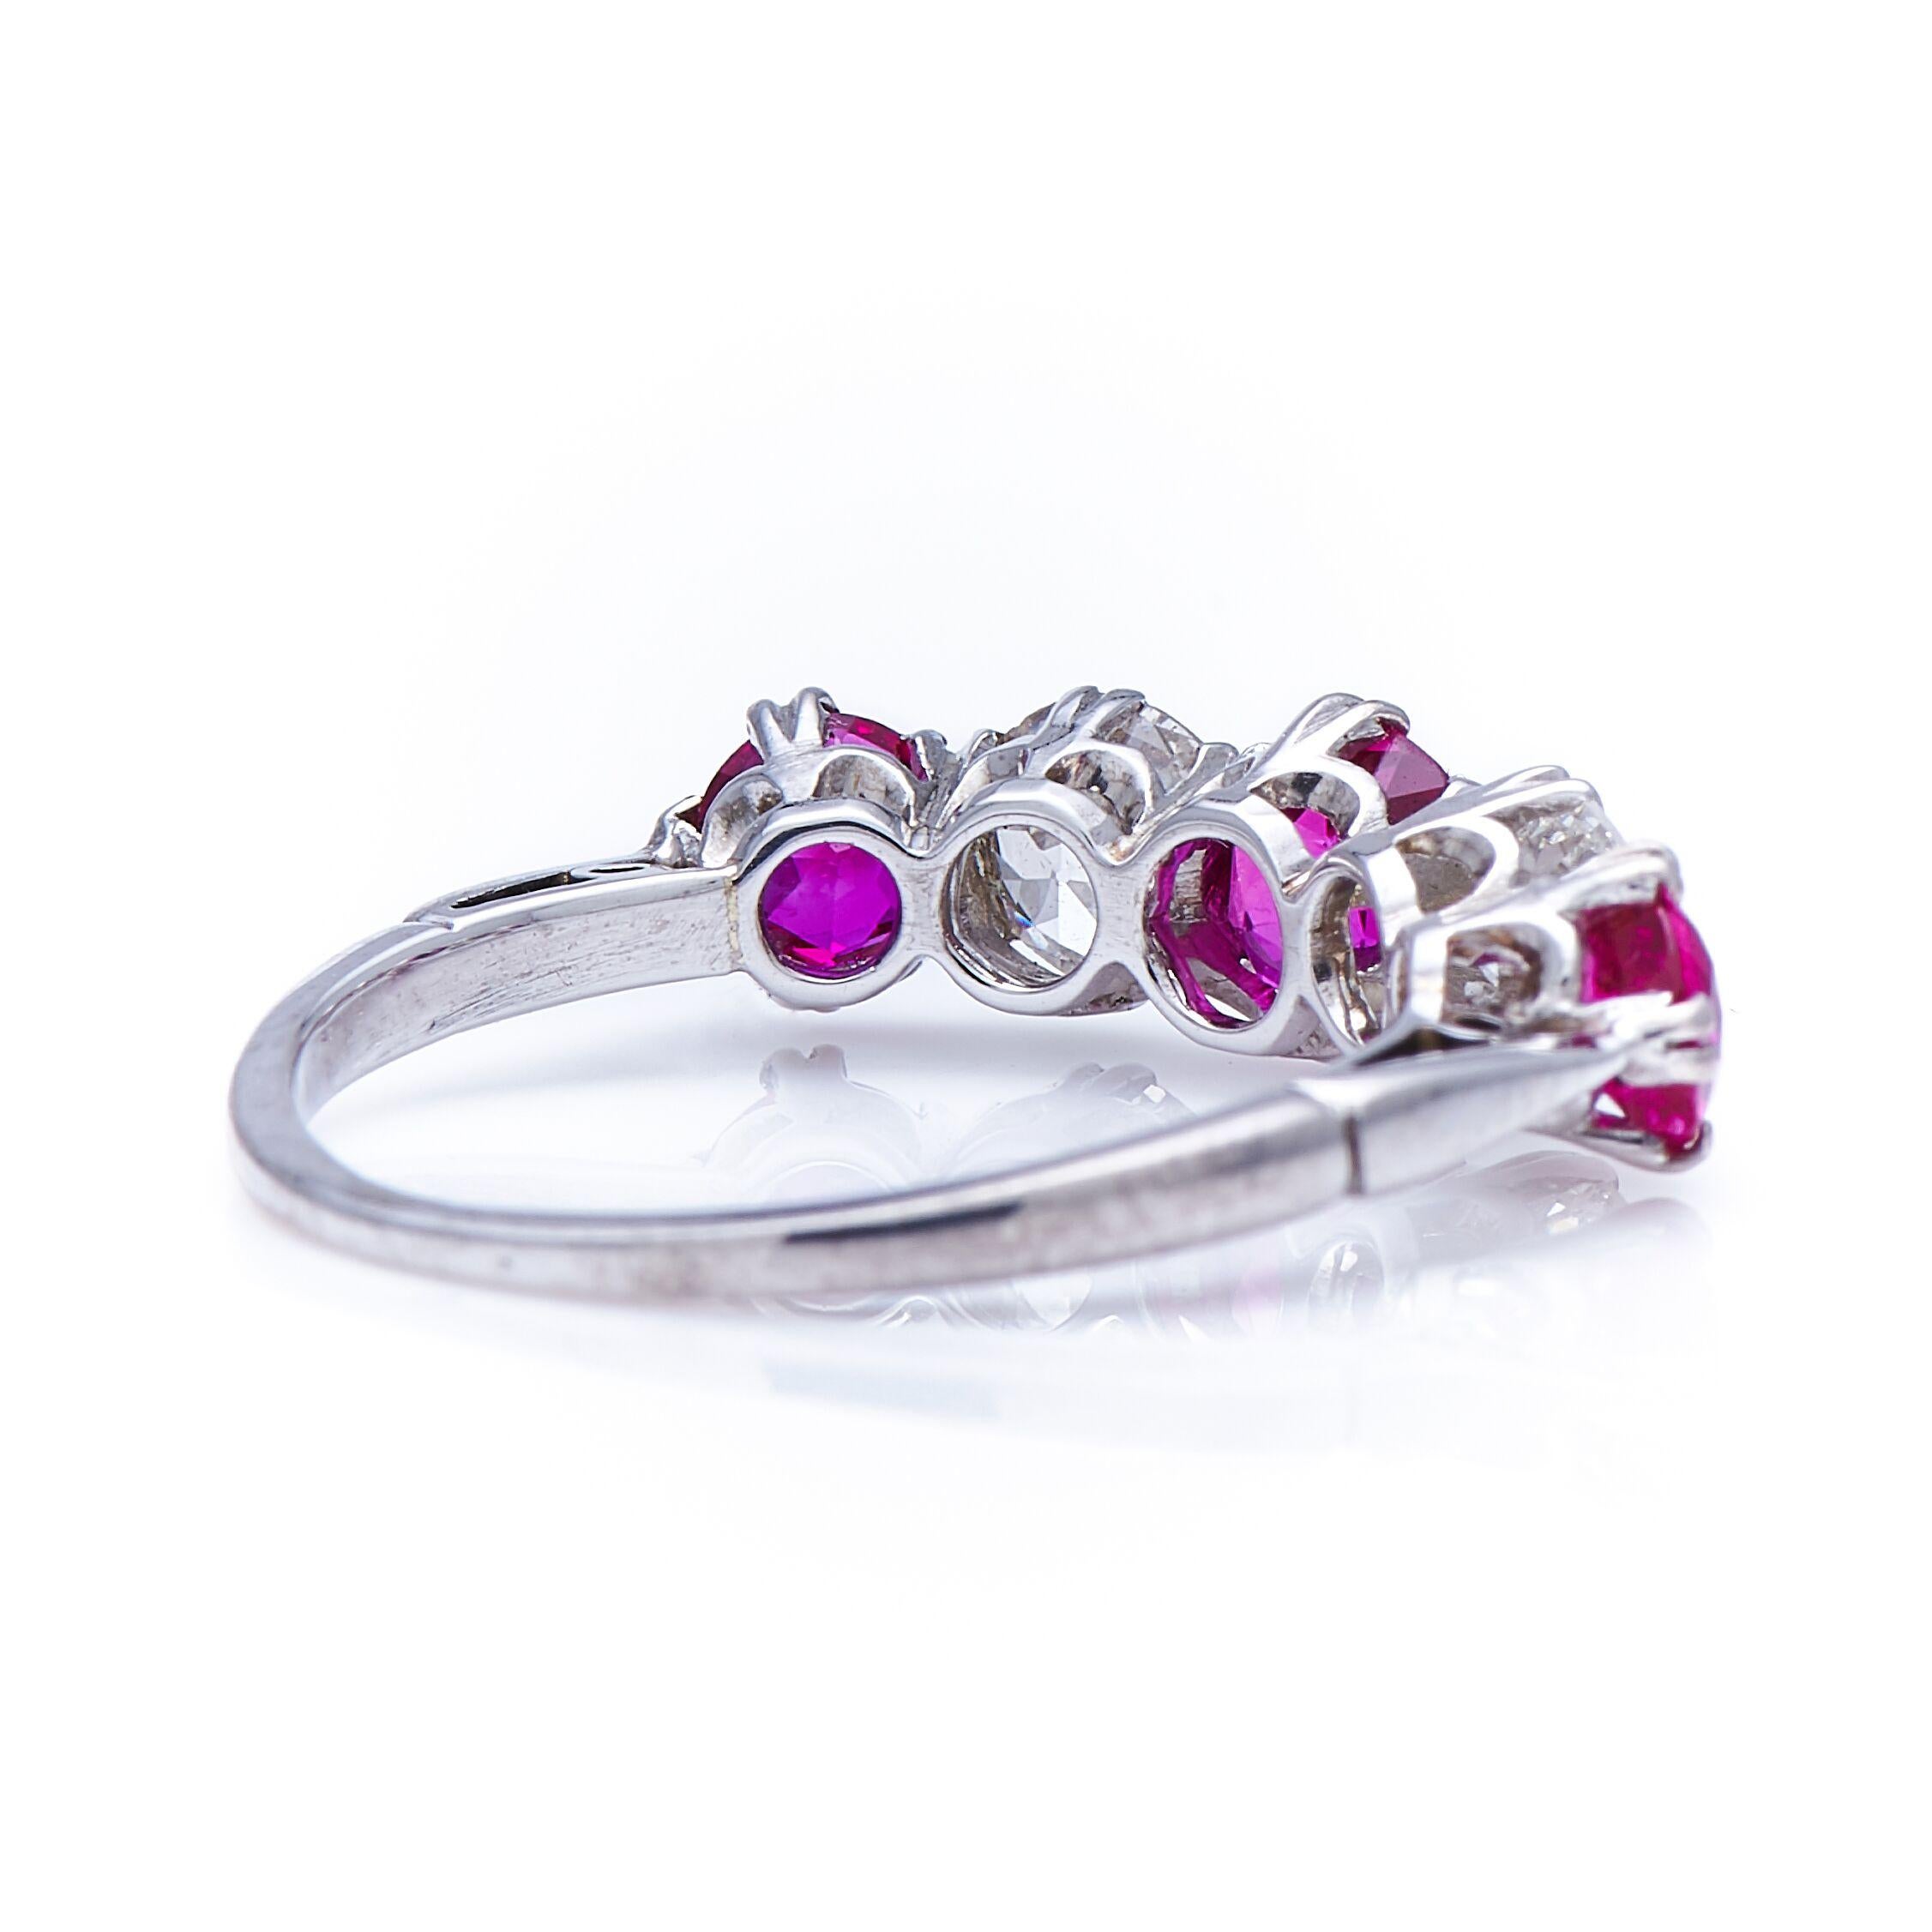 Old European Cut Antique, Edwardian, 18 Carat White Gold, Ruby and Diamond Five-Stone Ring